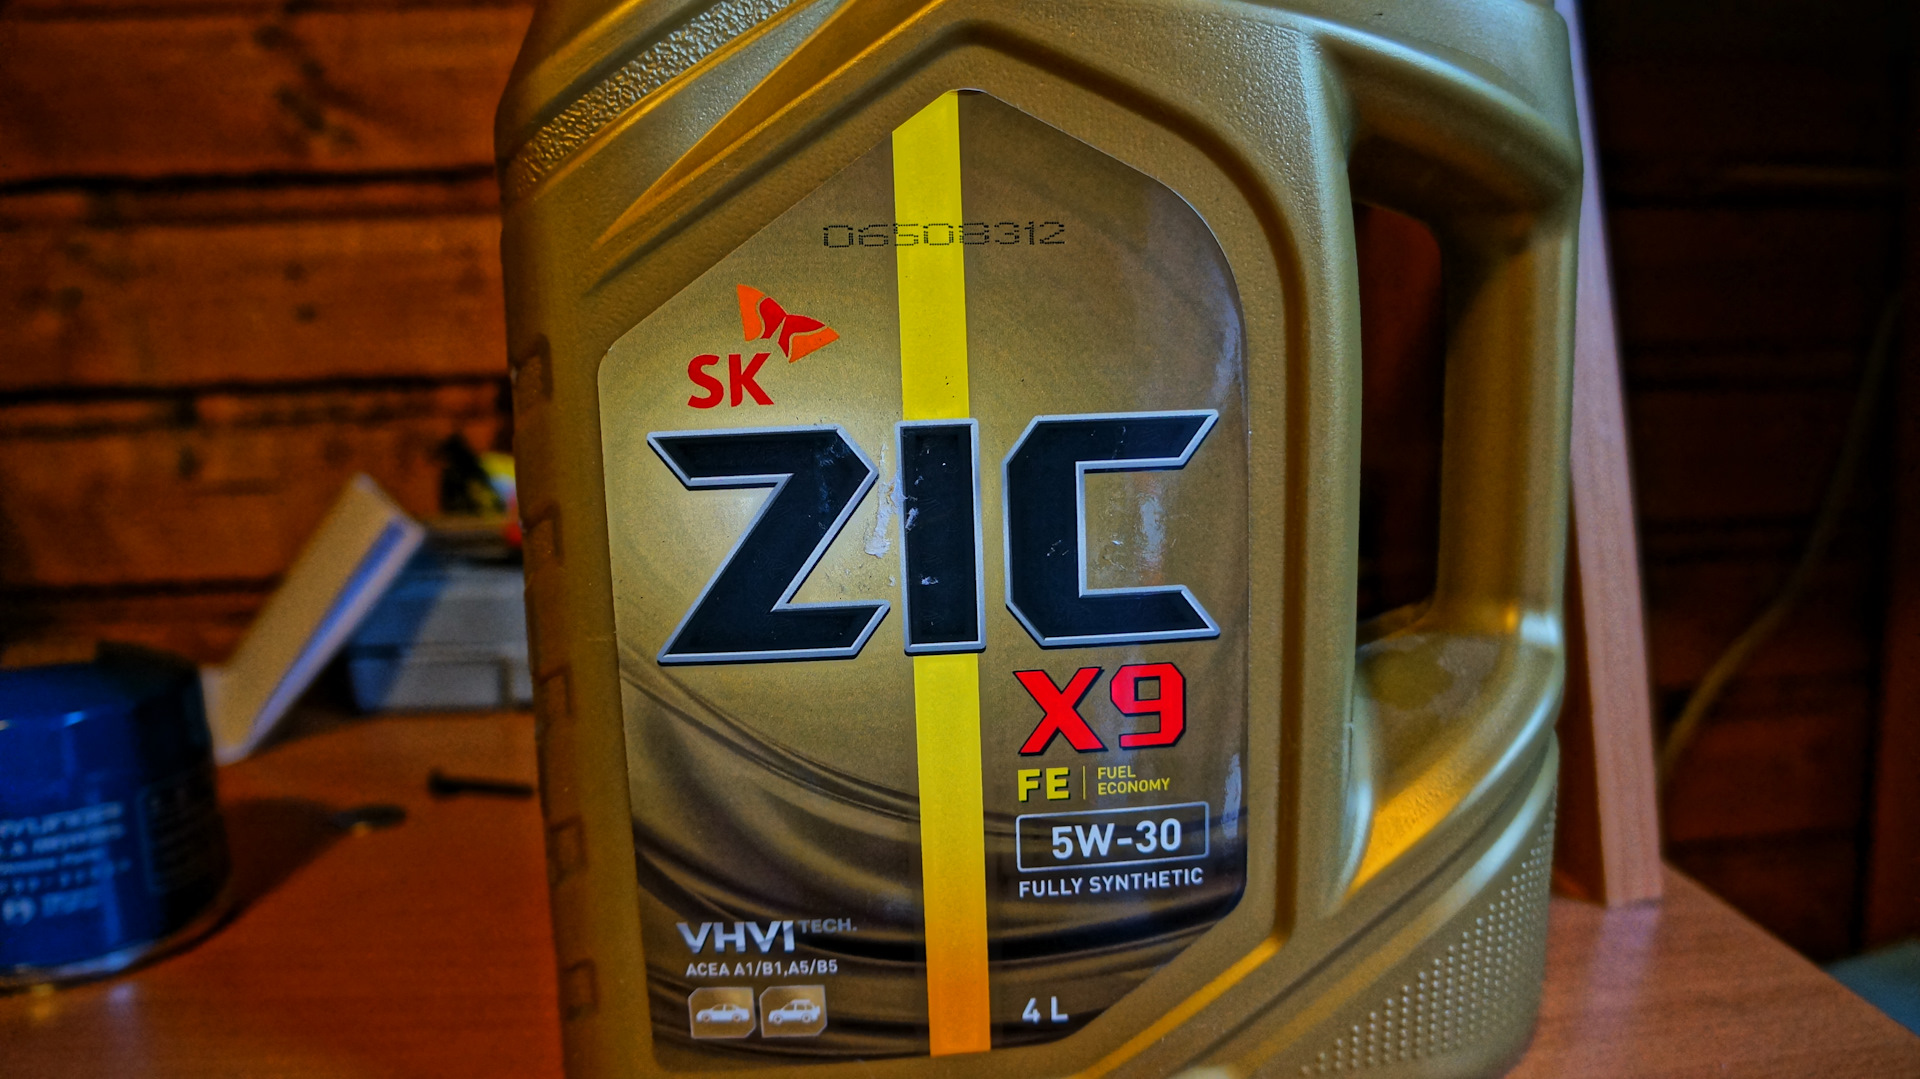 Zic x9 5w30 купить. ZIC x9 Fe 5w-30 4л. ZIC x9 Fe 5w30 4л (162615). ZIC x9 Fe 5w30 синтетика 4 л 162615. ZIC 5w30 fully Synthetic.